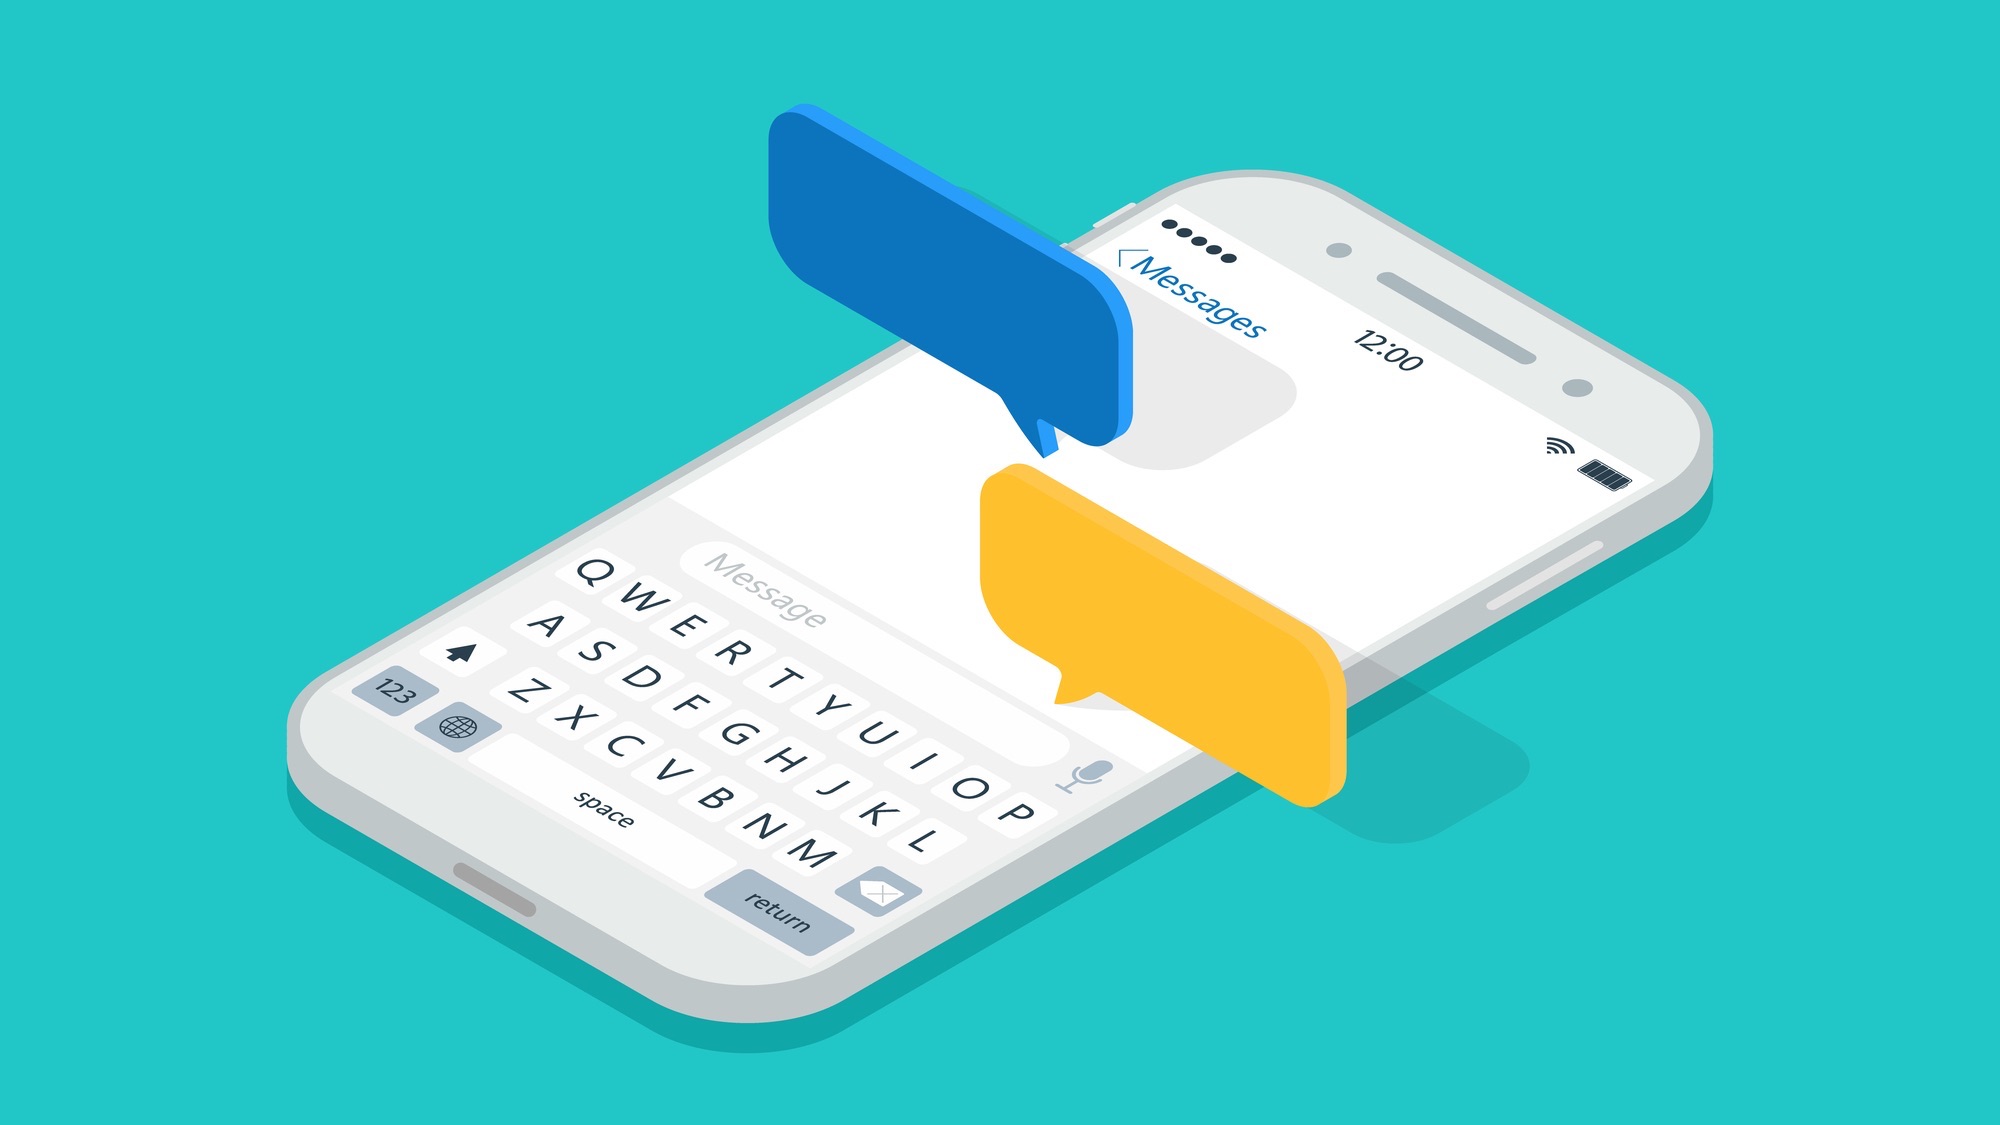 8 handy iPhone keyboard tricks you might not know